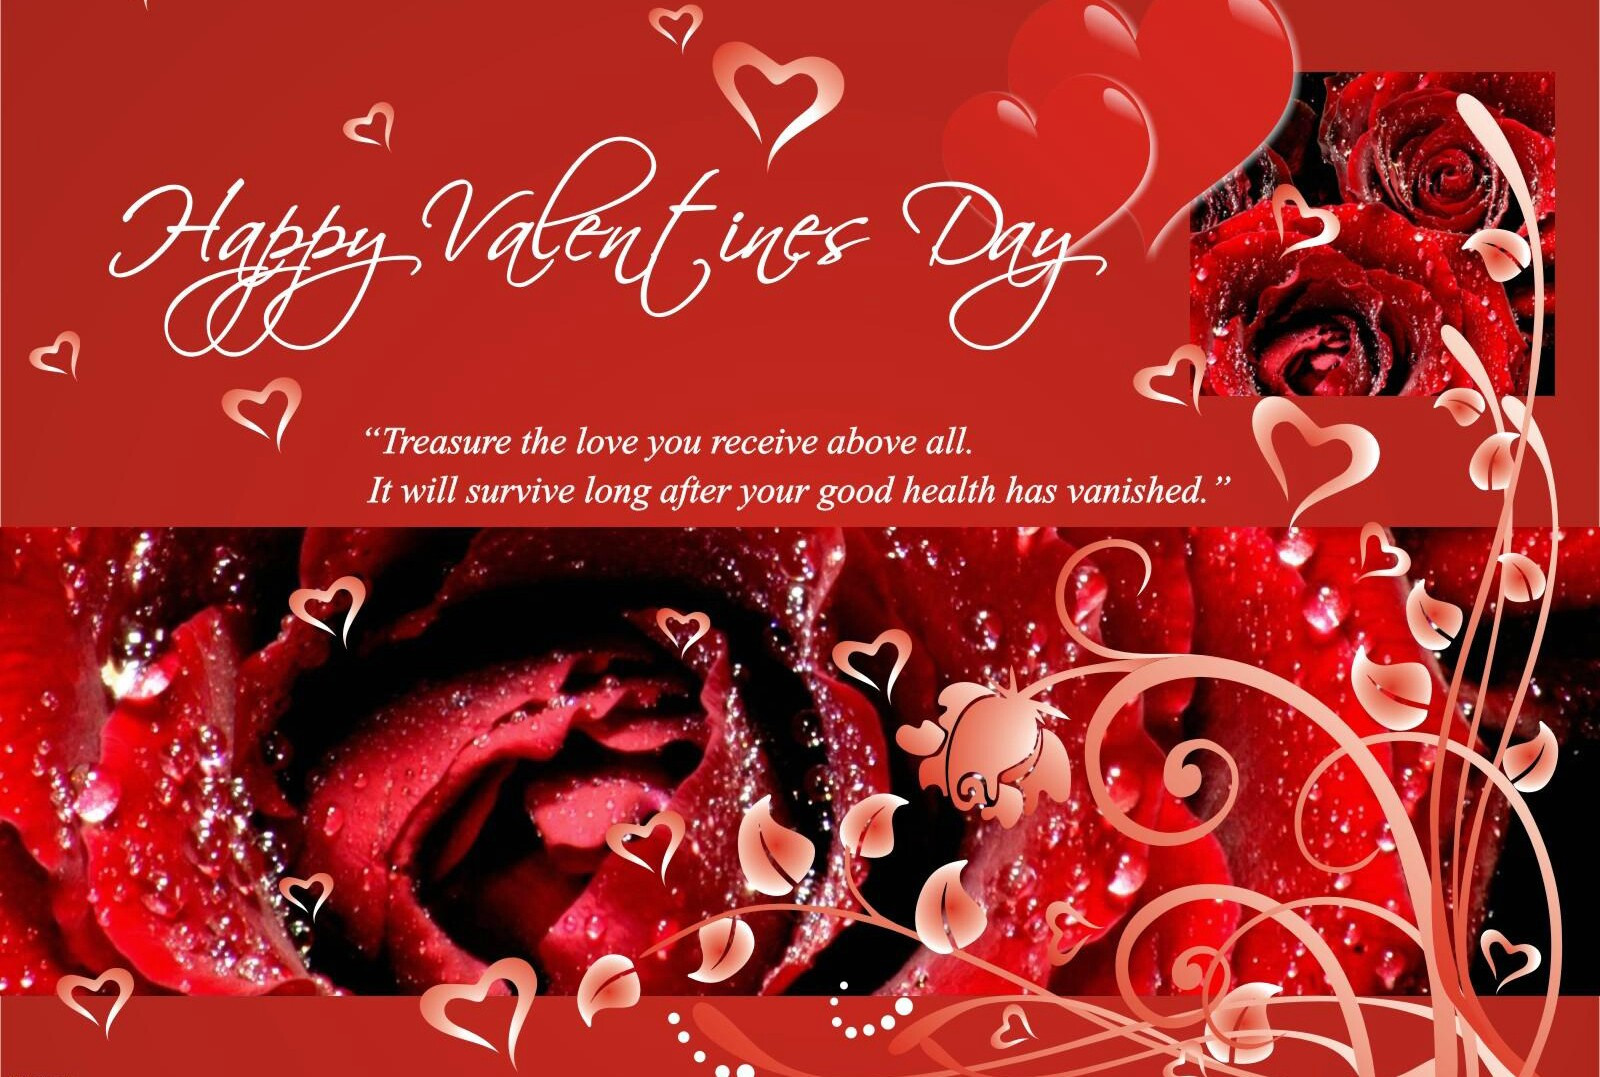 Valentines Day Pic And Quotes
 Happy Valentine s Day Quotes on Cards Funny